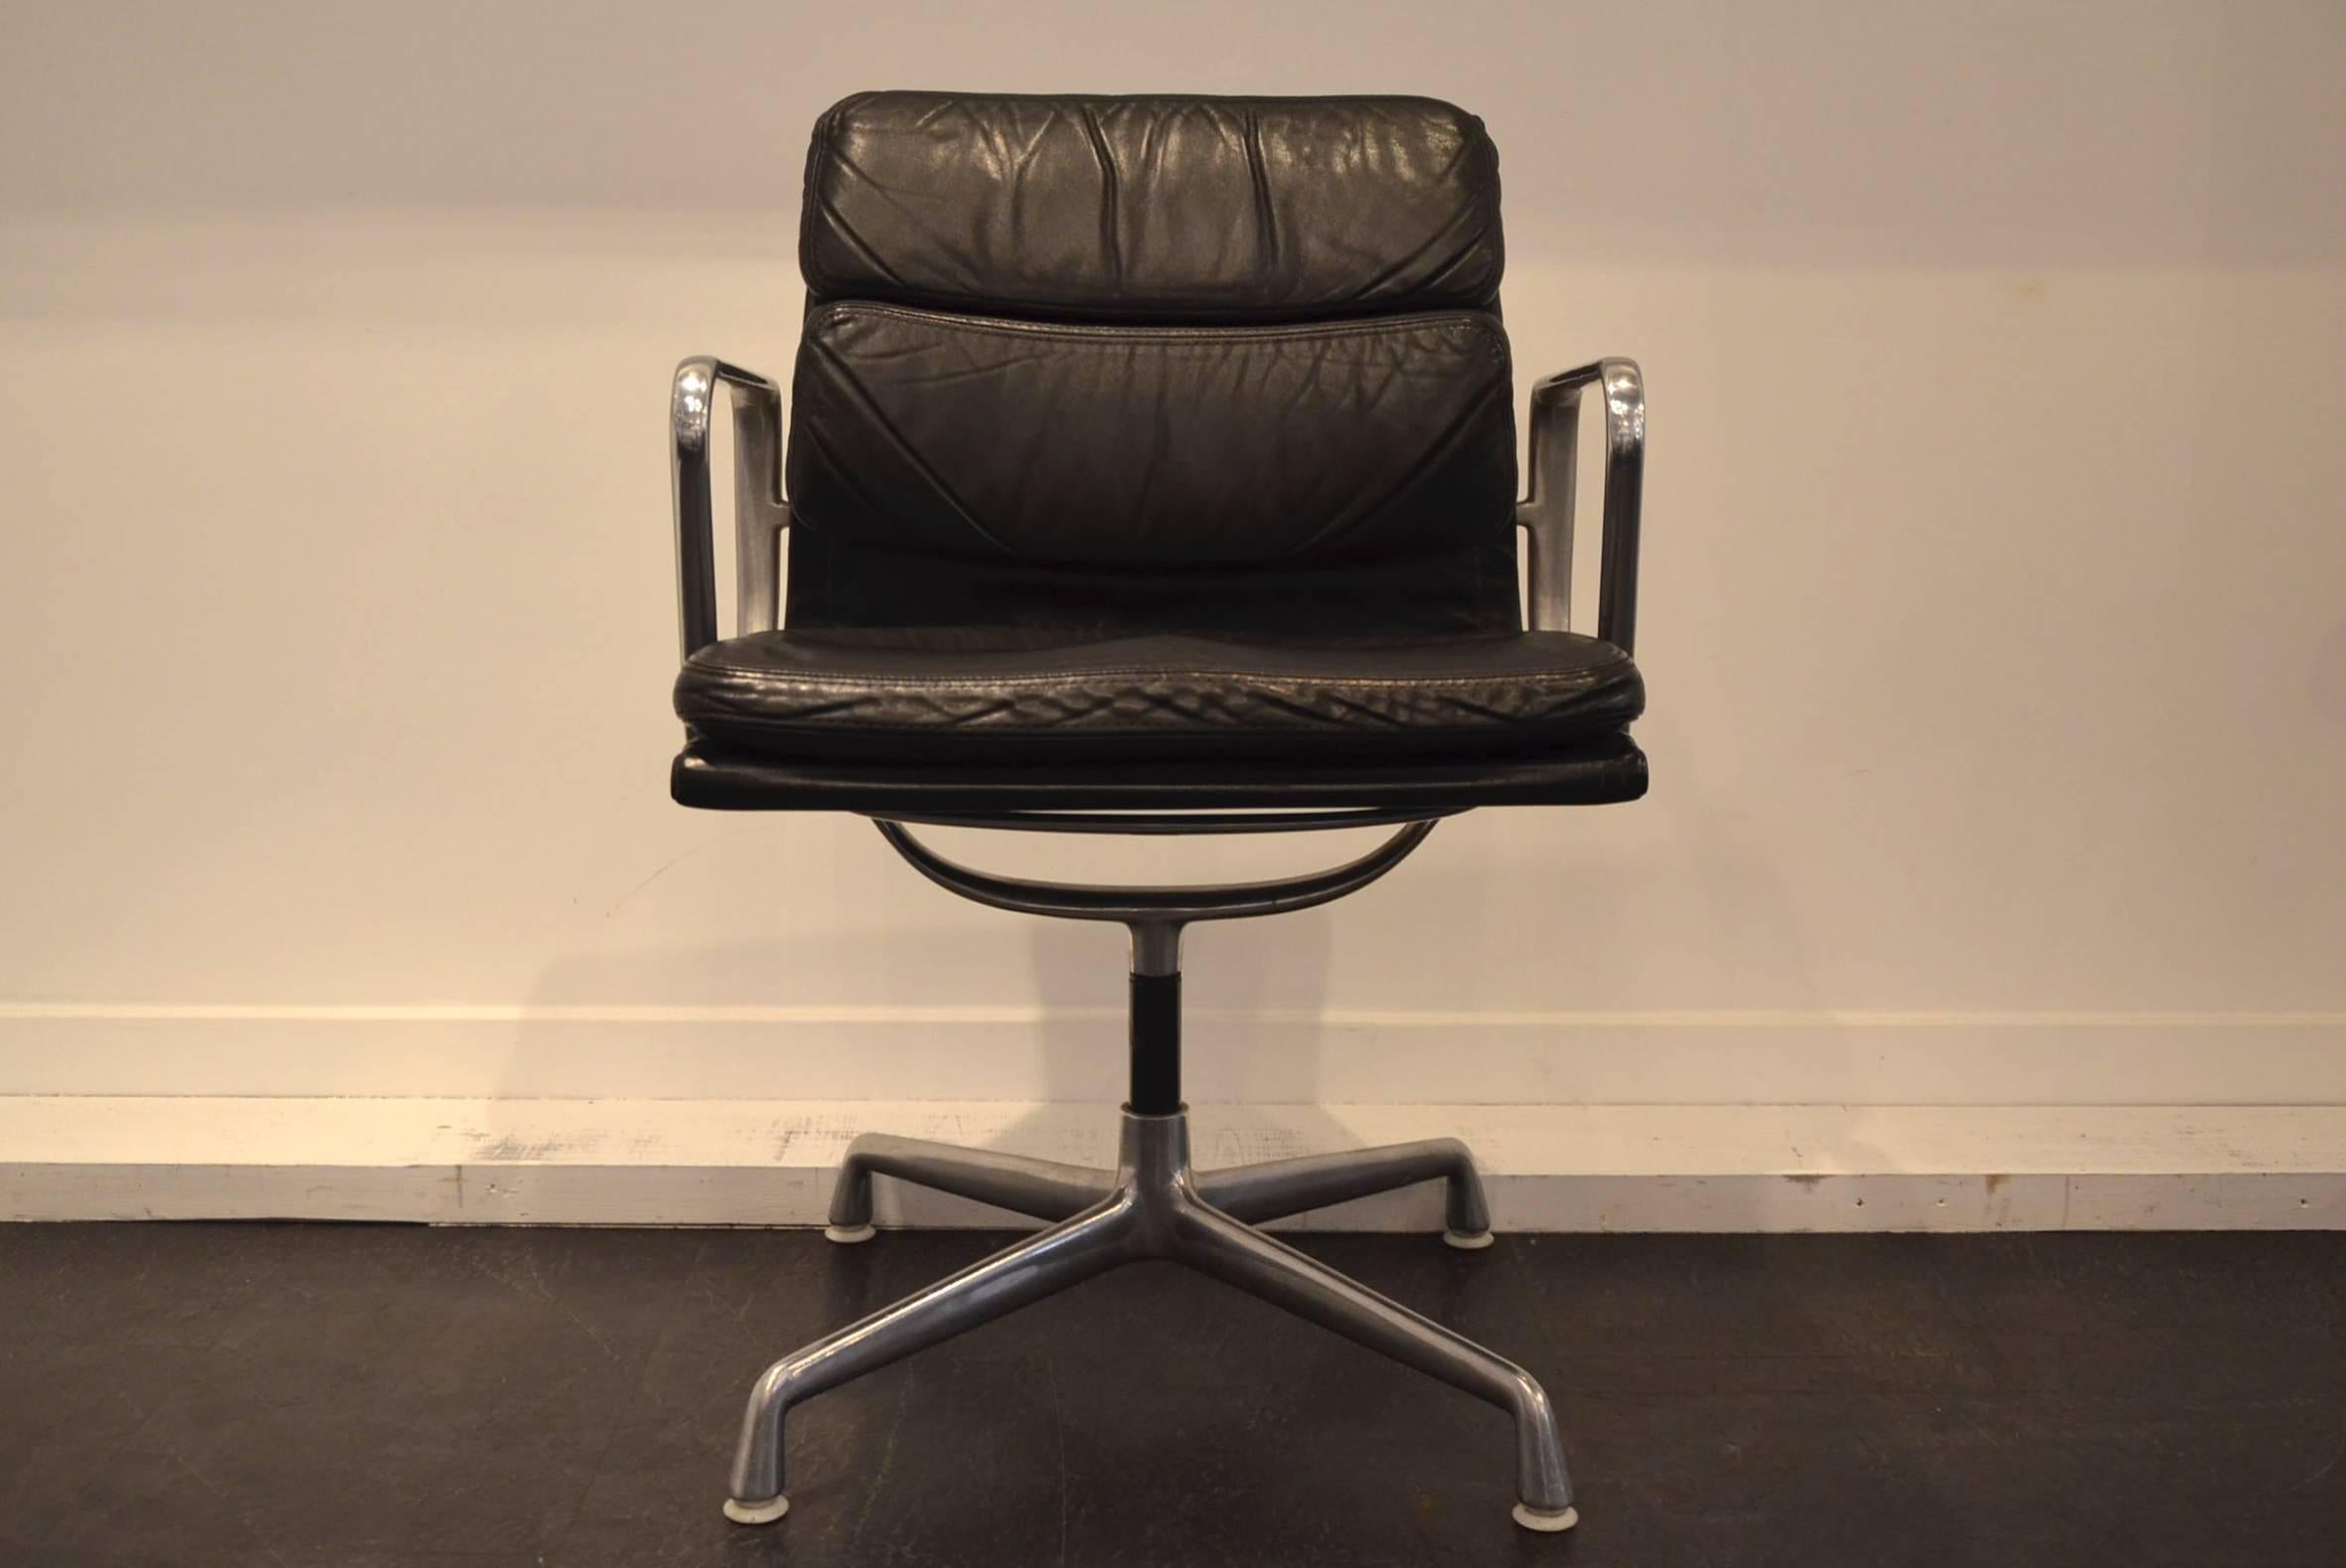 Black soft pad chairs model EA 208 designed by Charles and Ray Eames for Vitra, 1960s. The seats are padded in their original soft black leather, on a cast aluminium frame with plated chrome and a four-star base. Marked with label and stamped frame.